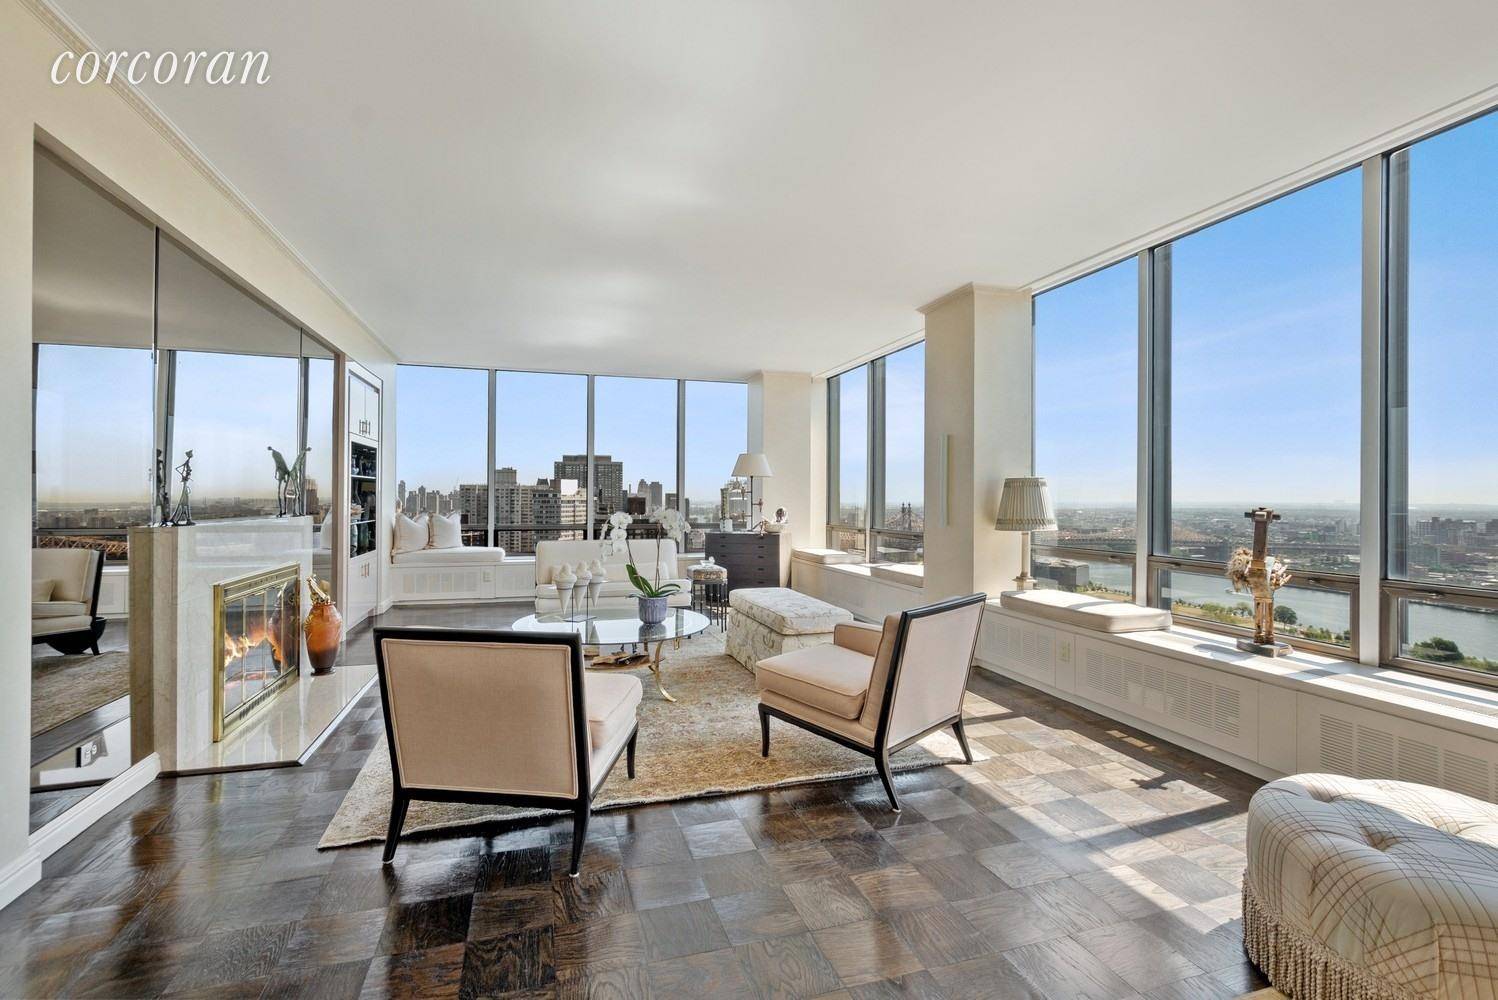 Breathtaking Penthouse Duplex with Sublime River and City Views from Every Room.